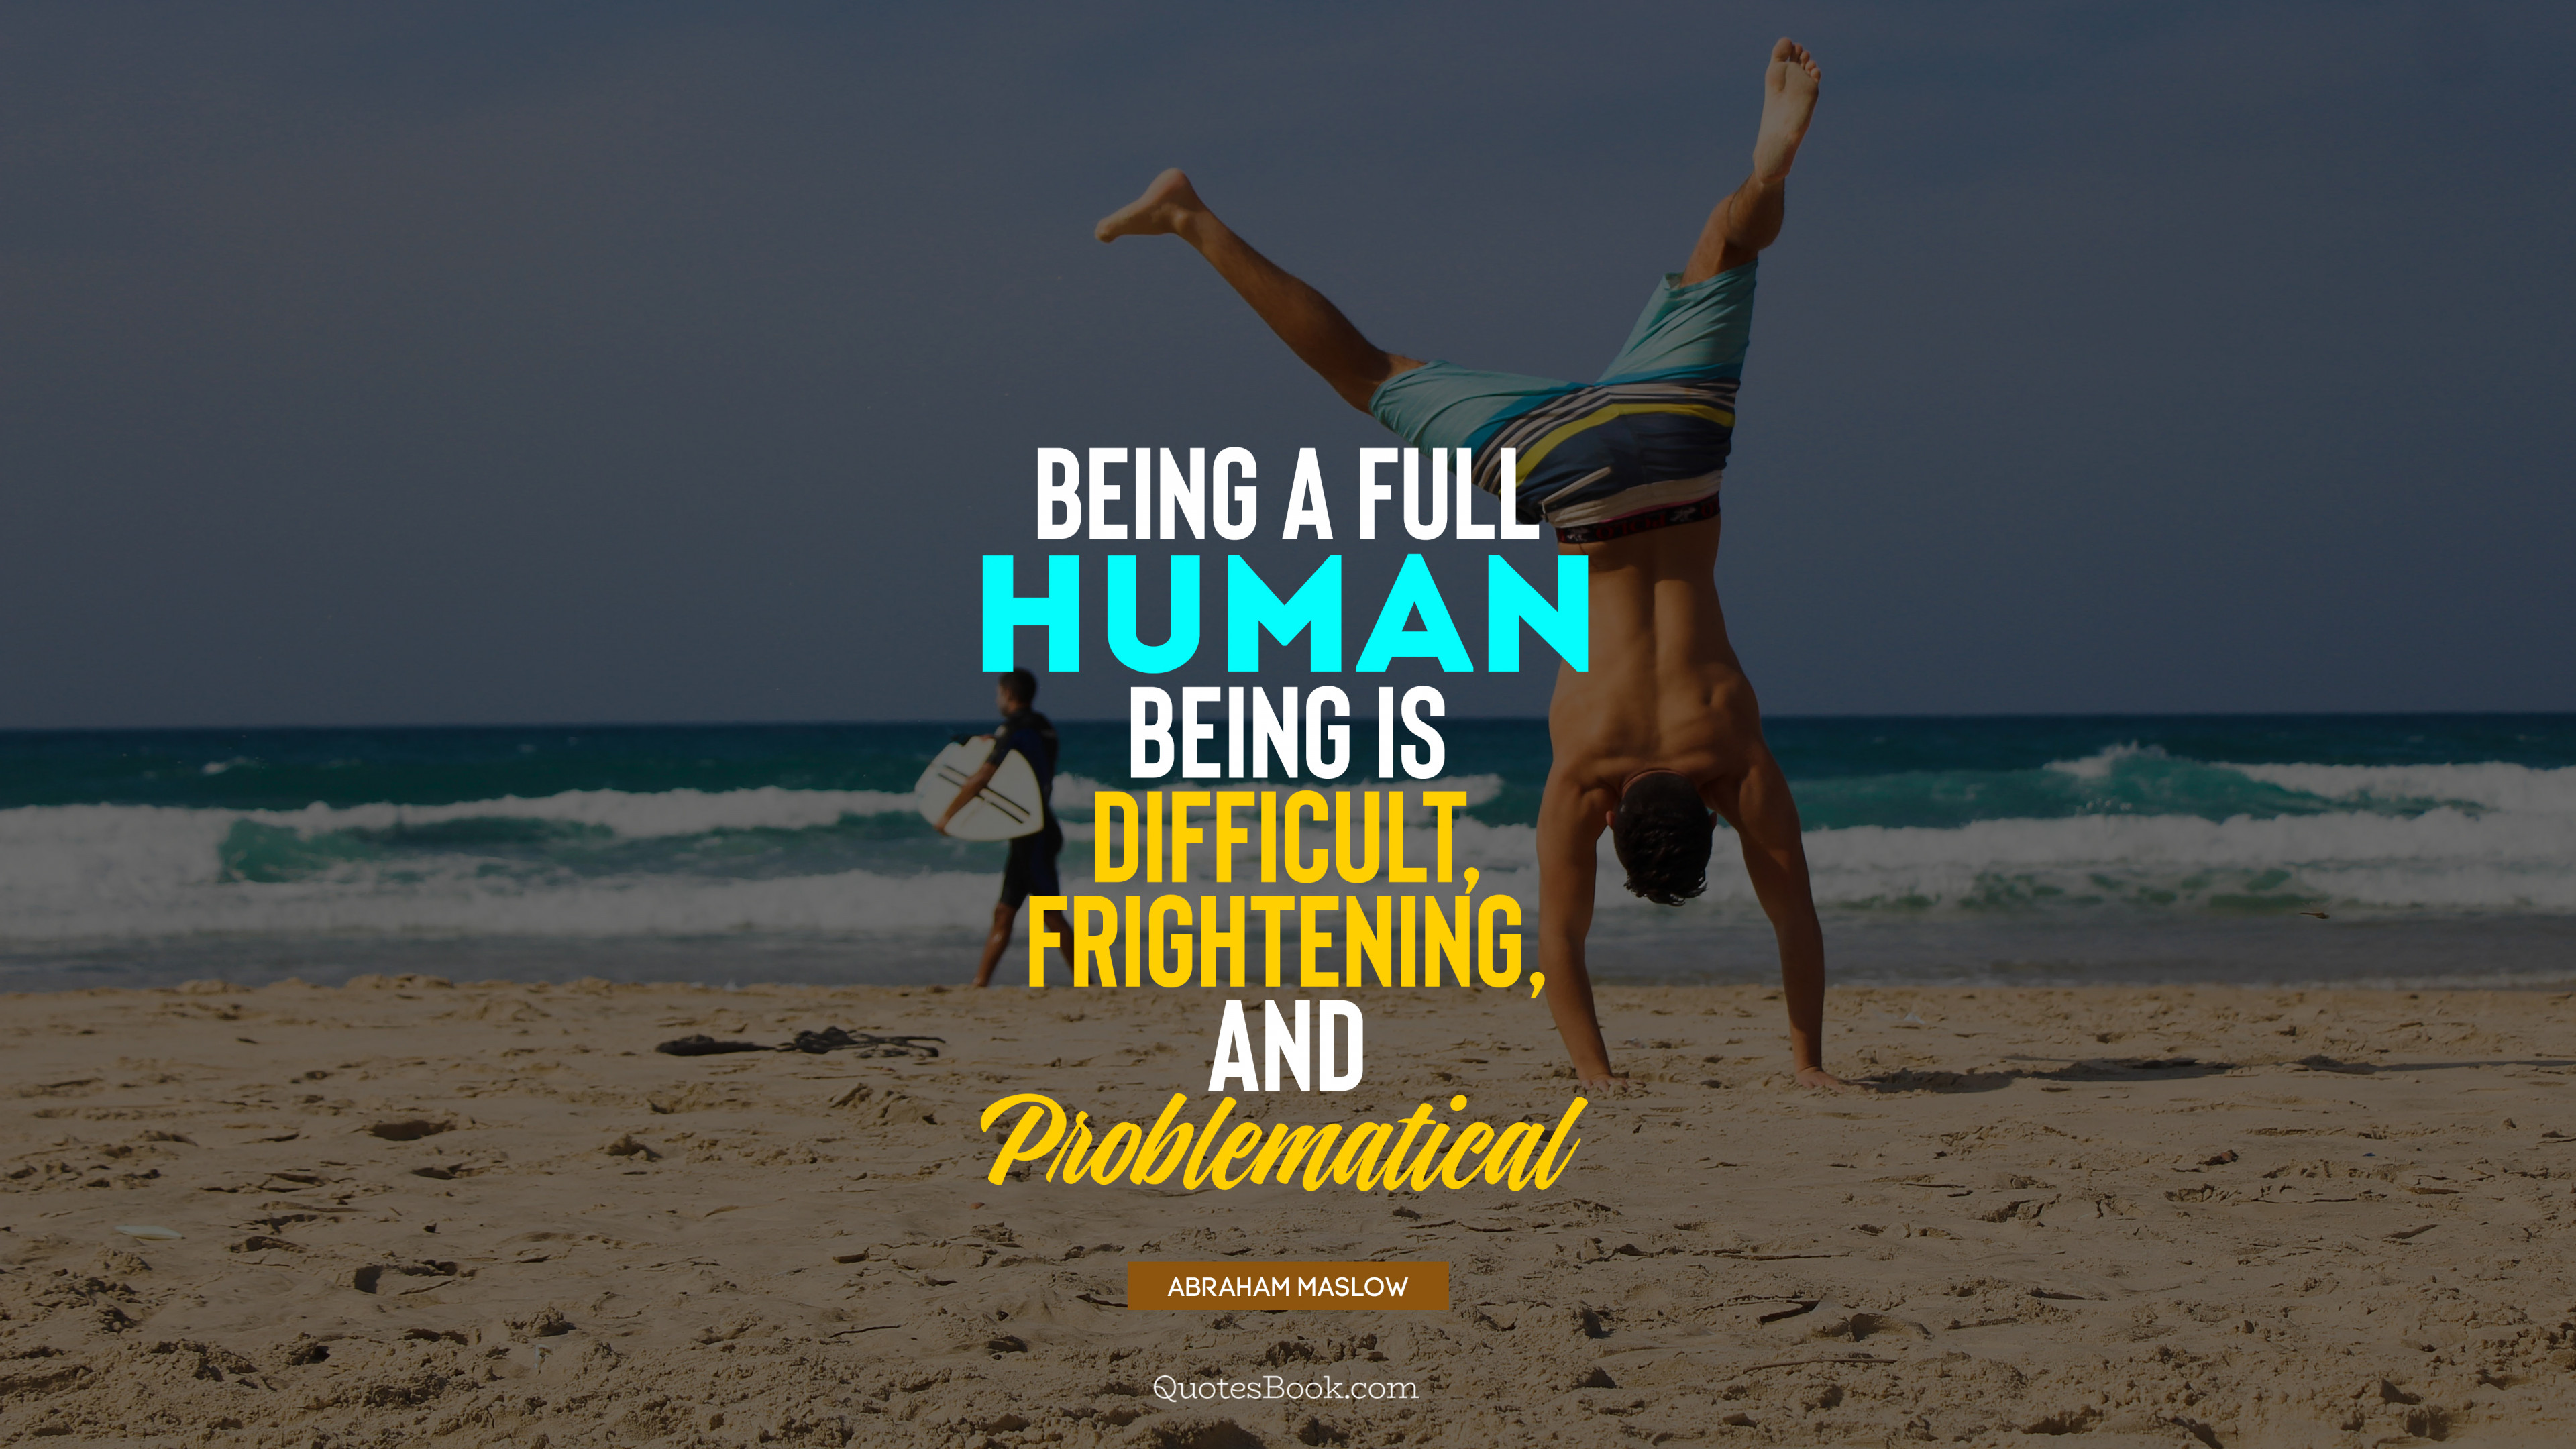 Being a full human being is difficult, frightening, and